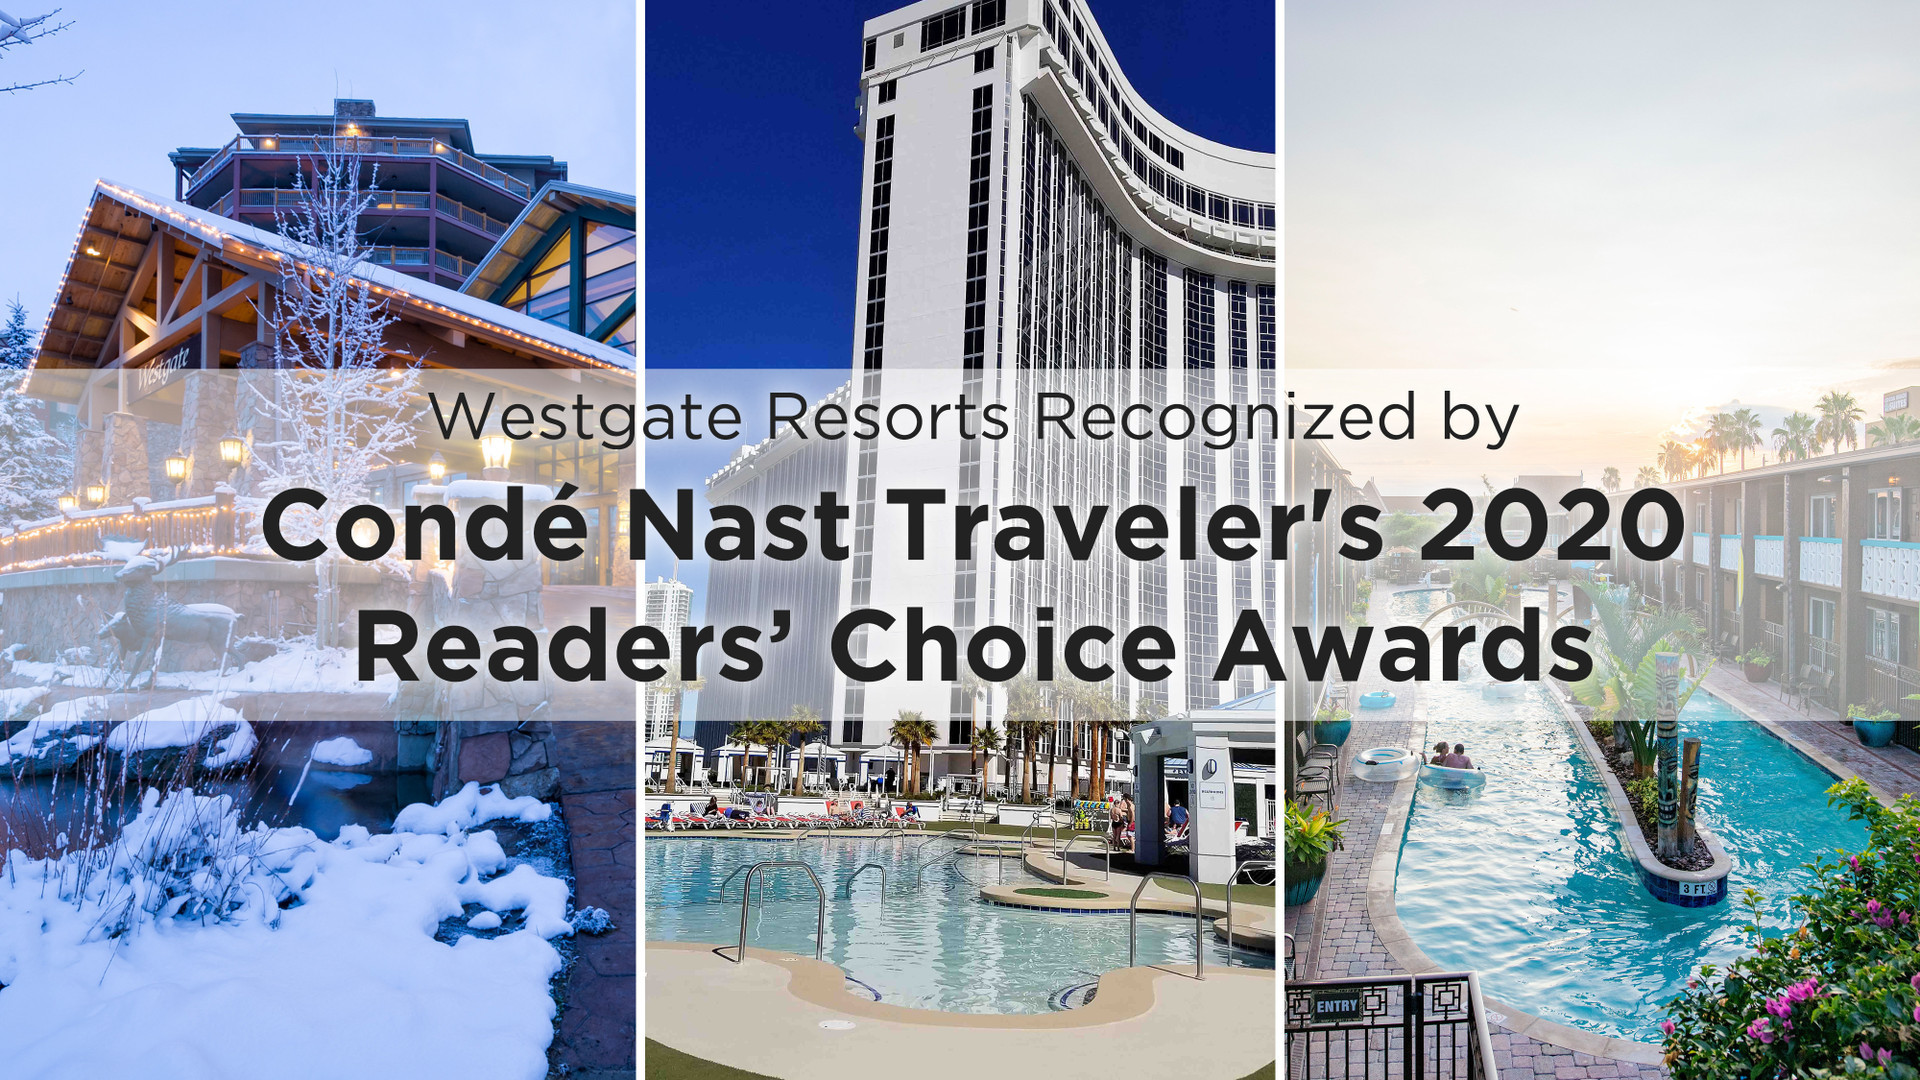 Westgate Resorts Recognized by Condé Nast Traveler's 2020 Readers’ Choice Awards